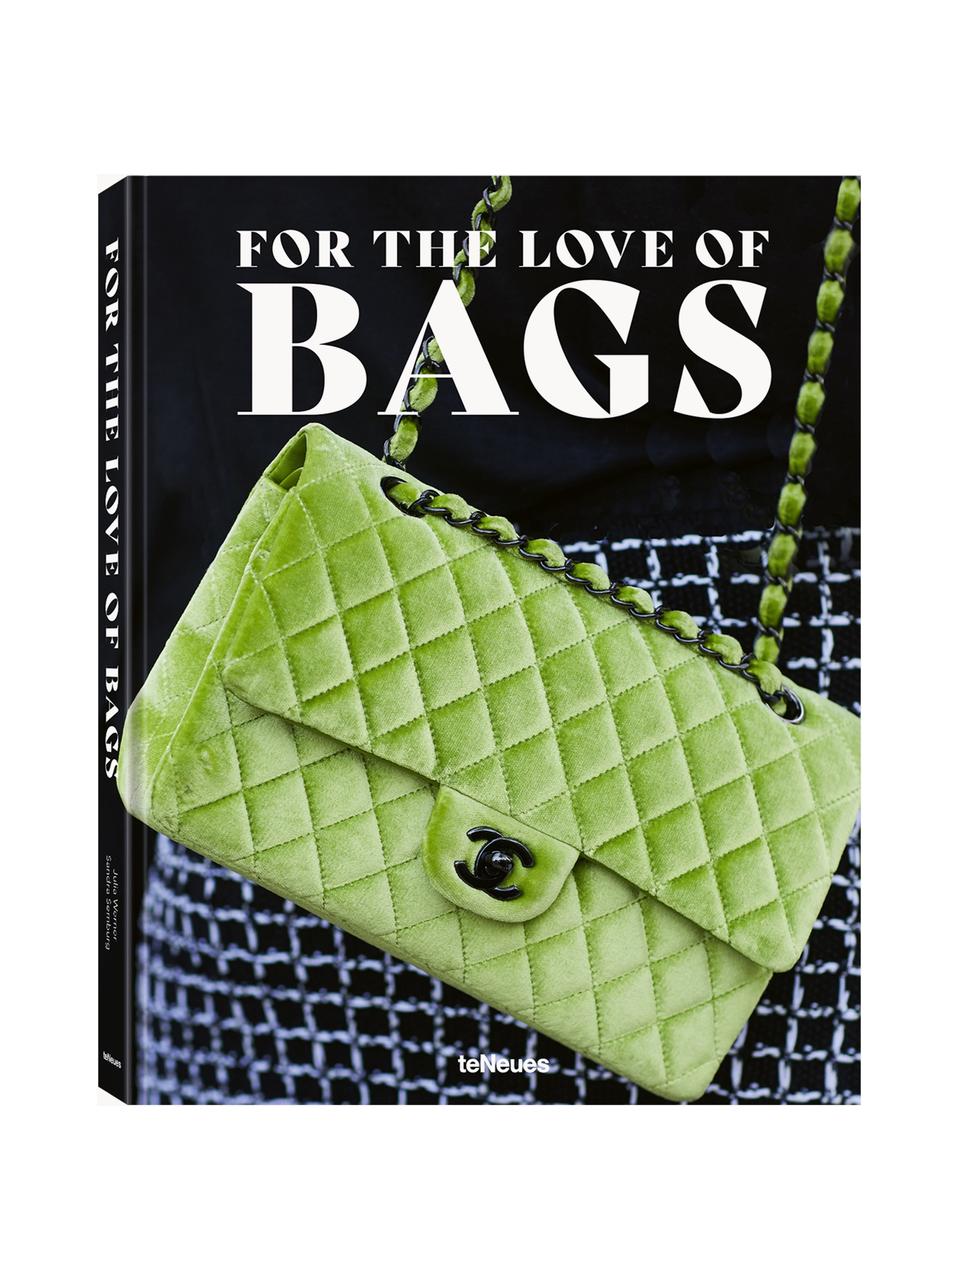 Libro ilustrado For the Love of Bags, Papel, For the Love of Bags, An 24 x Al 31 cm